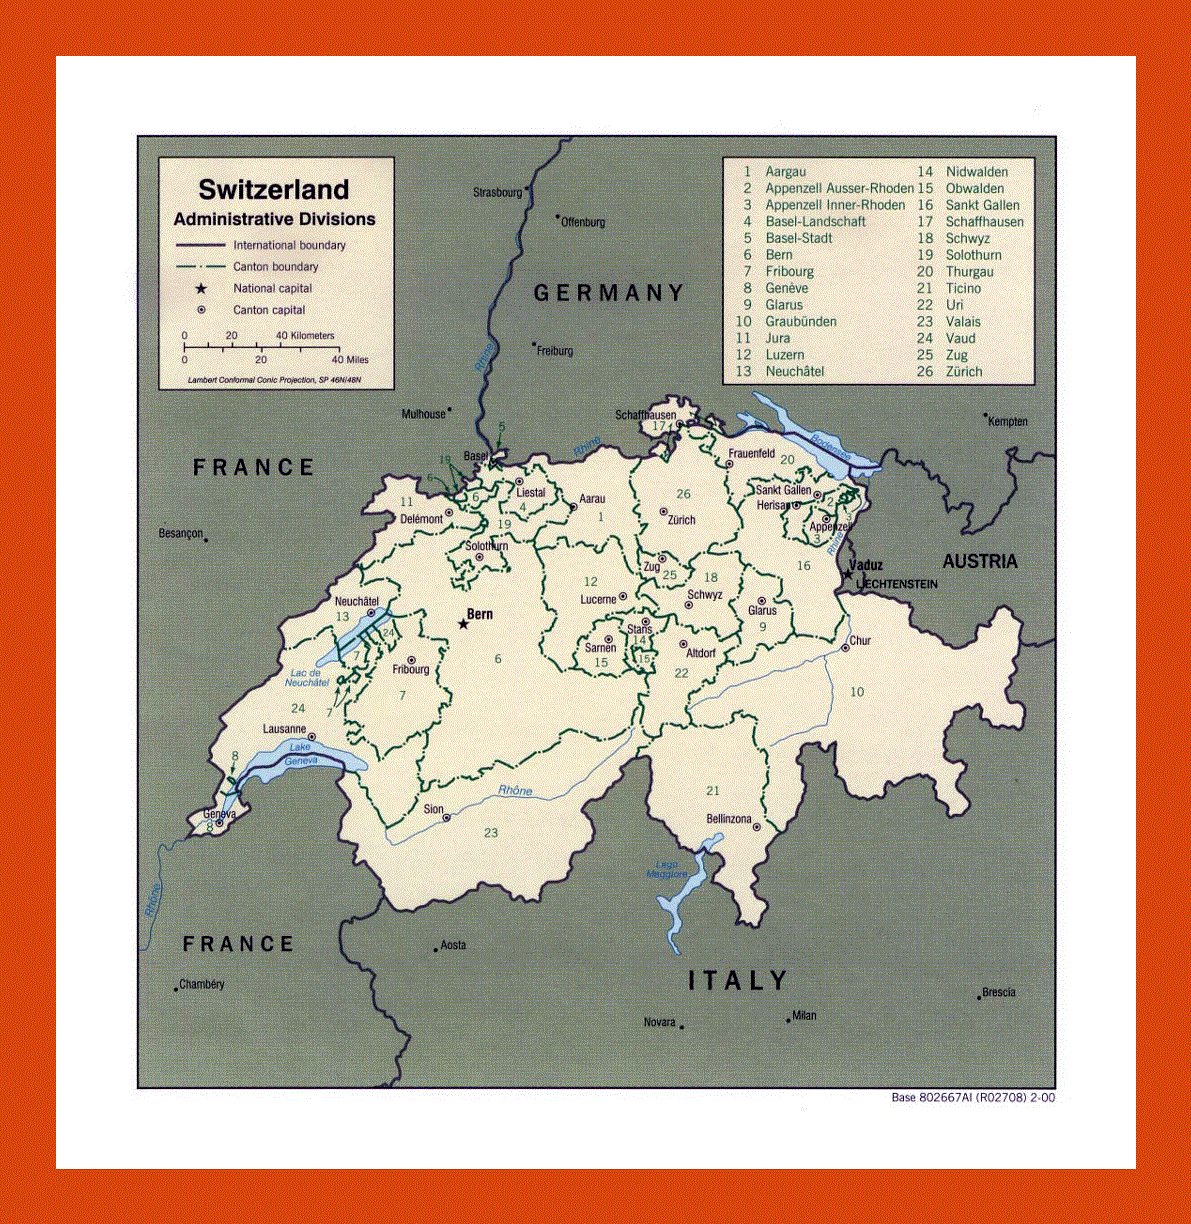 Administrative divisions map of Switzerland